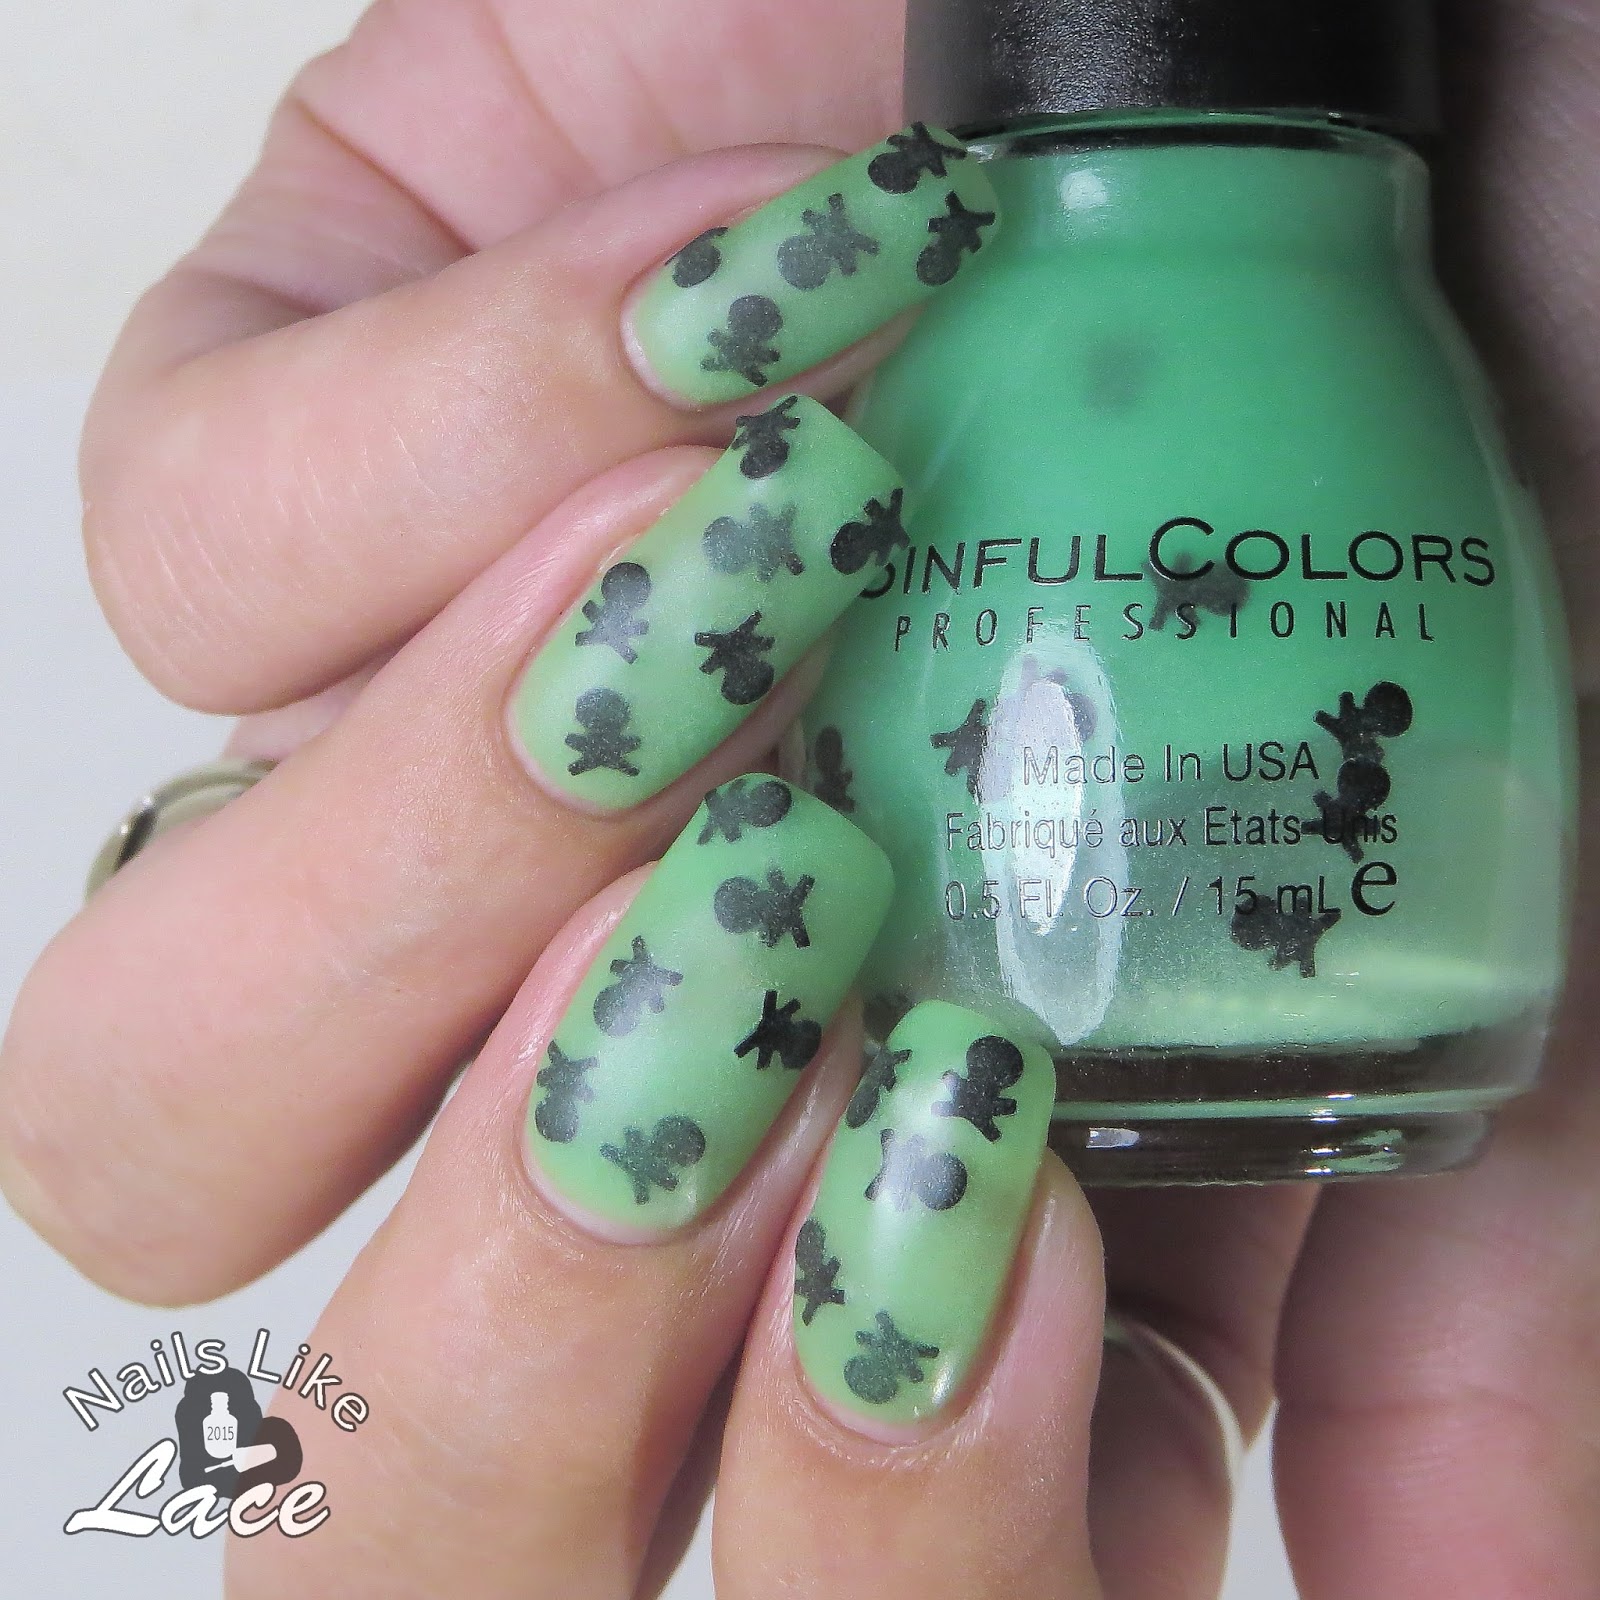 sinful colors glow in the dark nail polish